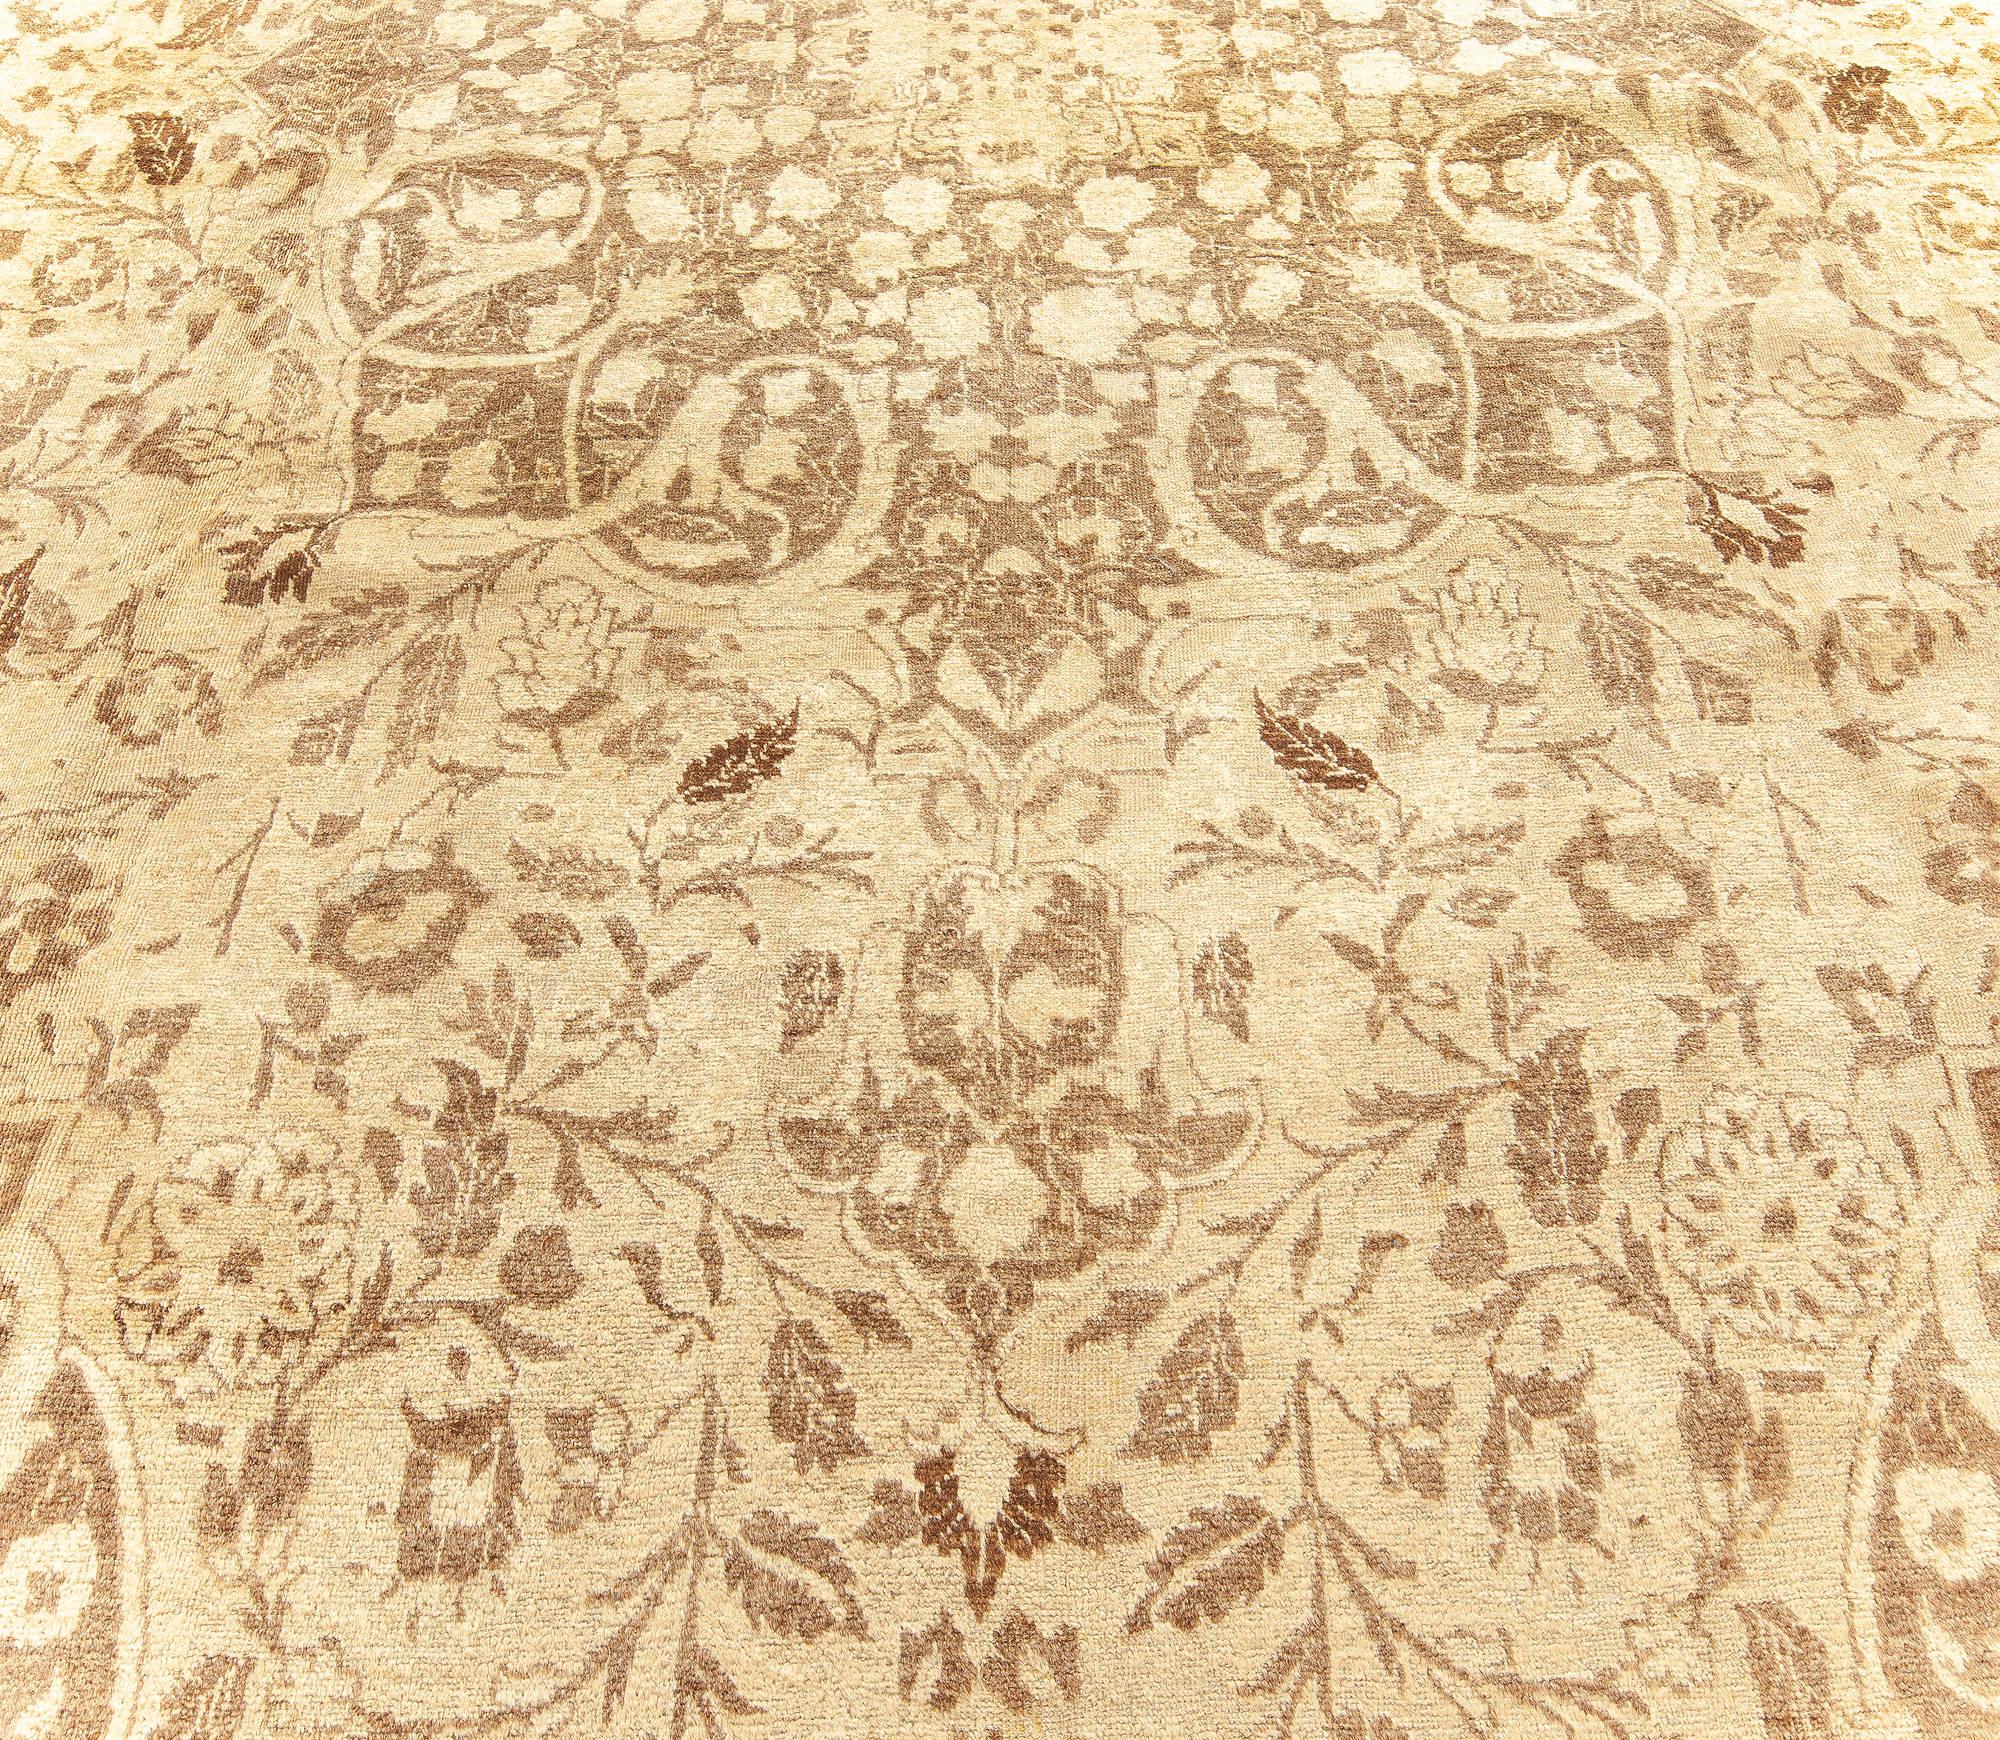 Authentic Persian Tabriz Brown Handmade Wool Rug In Good Condition For Sale In New York, NY